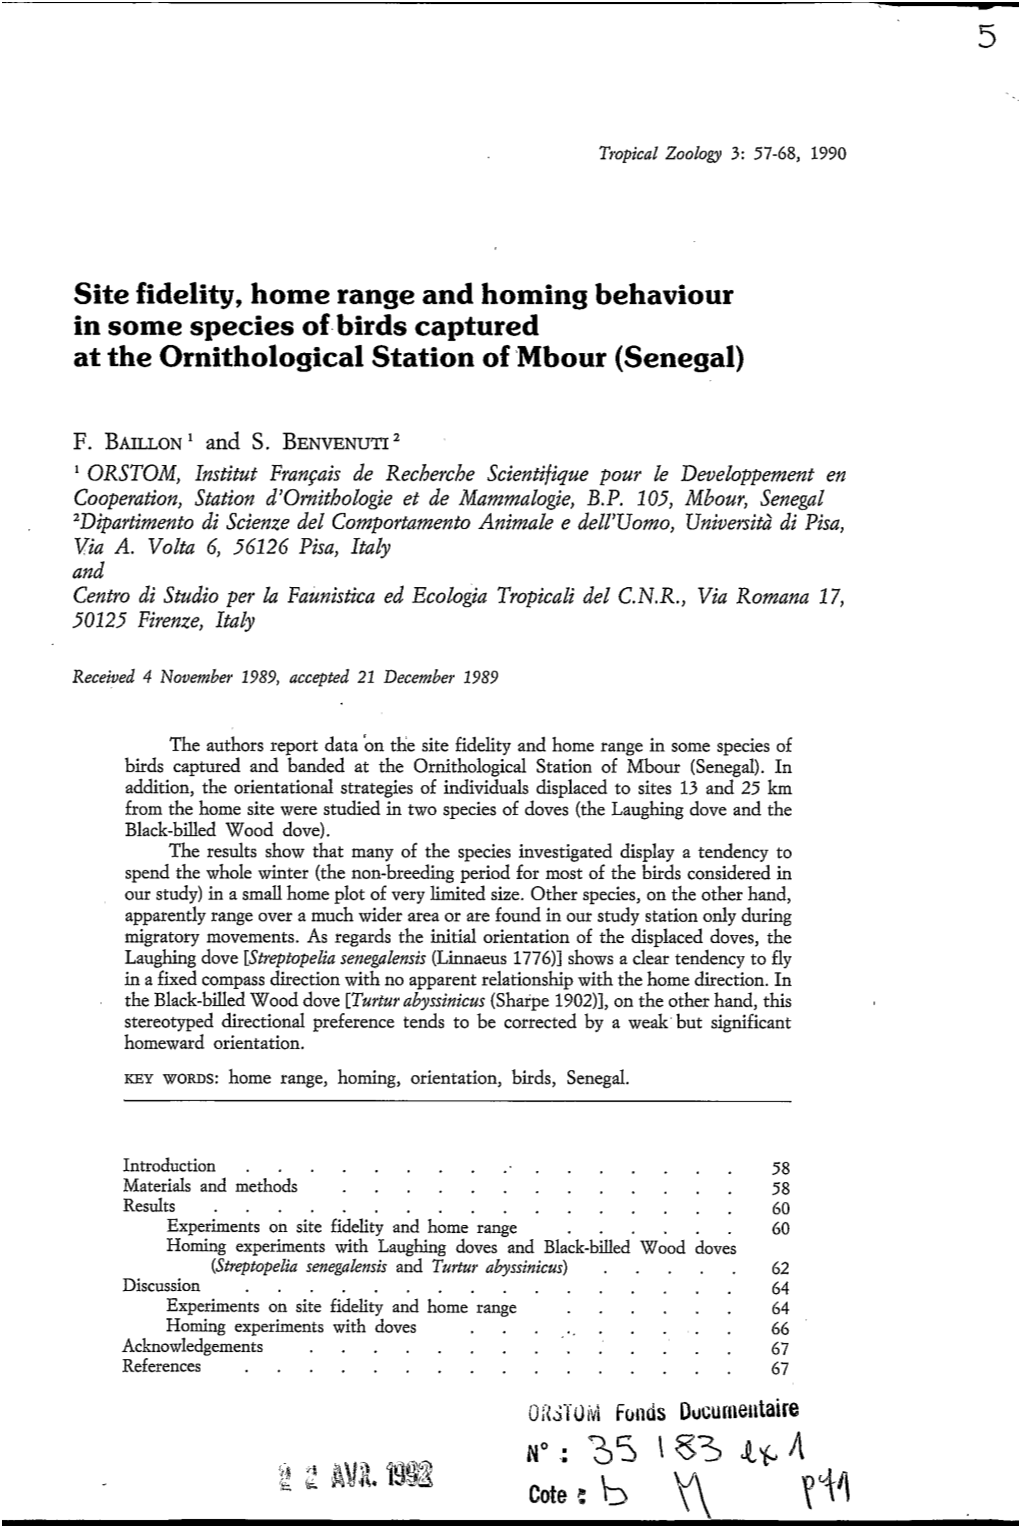 Site Fidelity, Home Range and Homing Behaviour in Some Species of Birds Captured at the Ornithological Station of M'bour